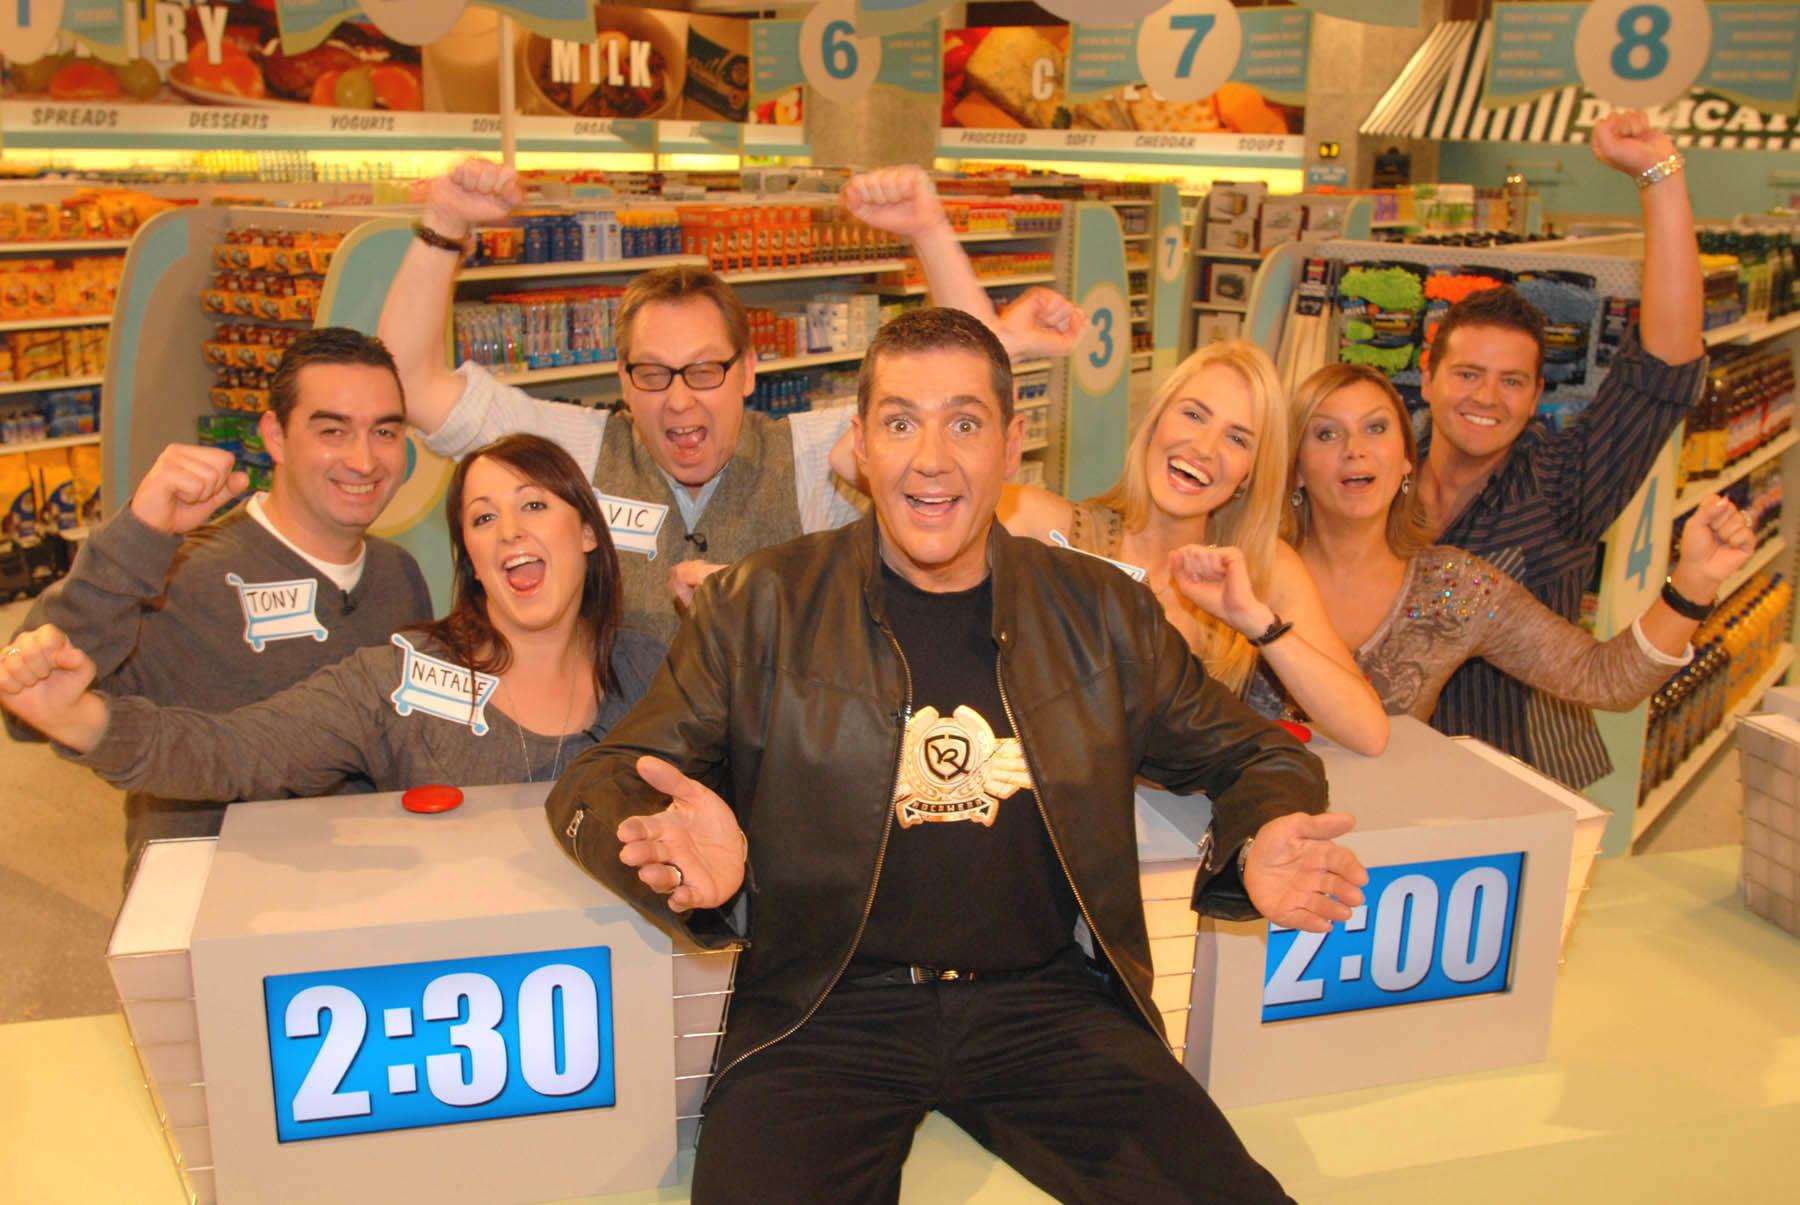 Dale Winton presents an episode of Supermarket Sweep at the Maidstone Studios featuring Vic Reeves, to his left, and Nancy Sorrell, to his right. Picture: ITV